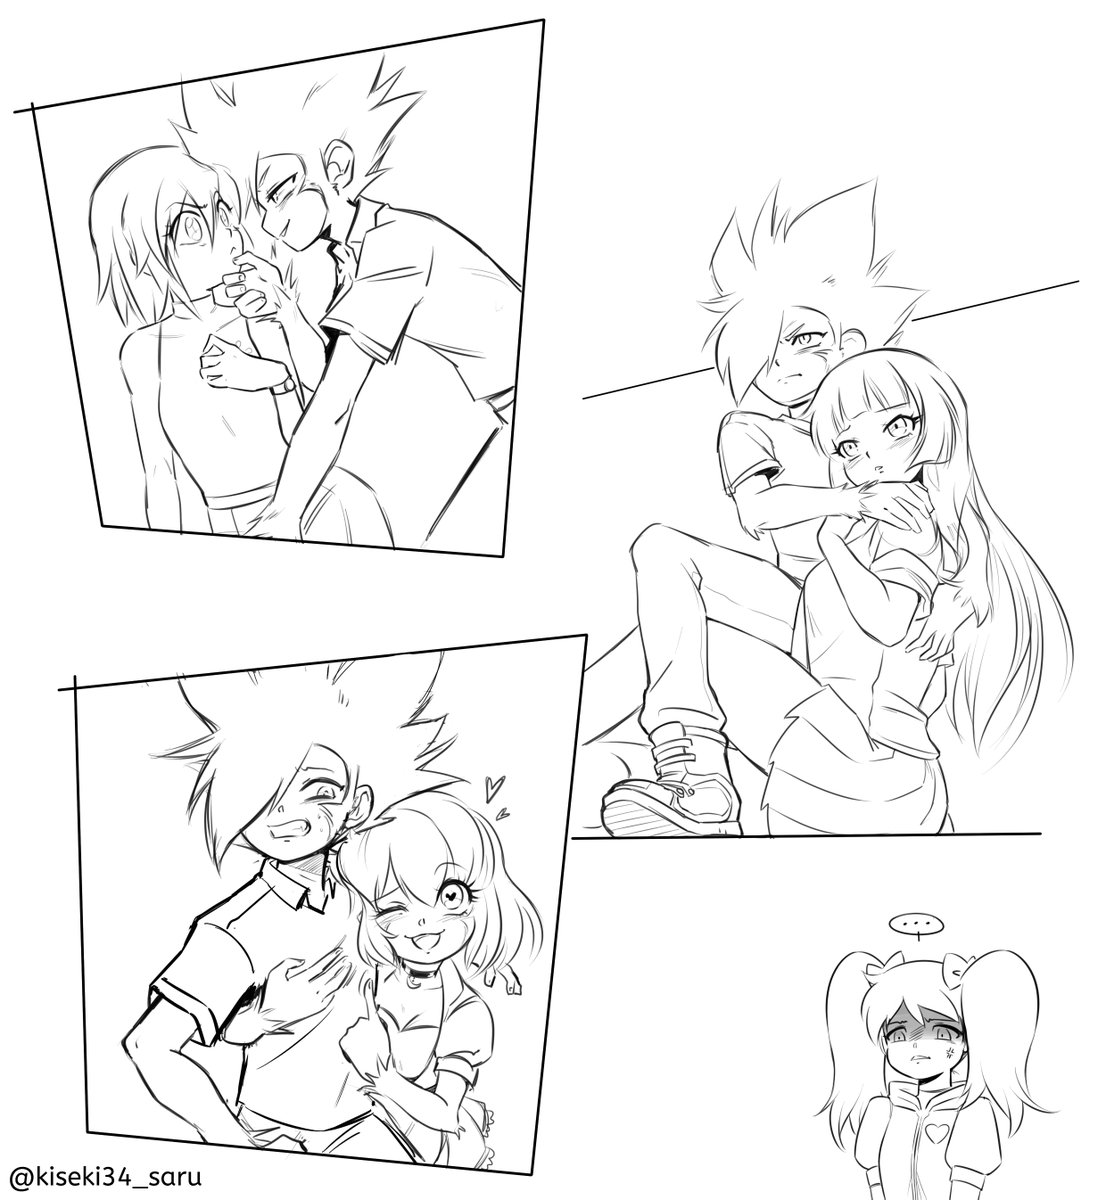 Teenage Specter is truly a Latin lover. Sayaka seems upset... #apeescape #スペクター #サルゲッチュ #サヤカ #ハルカ #ウッキーピンク